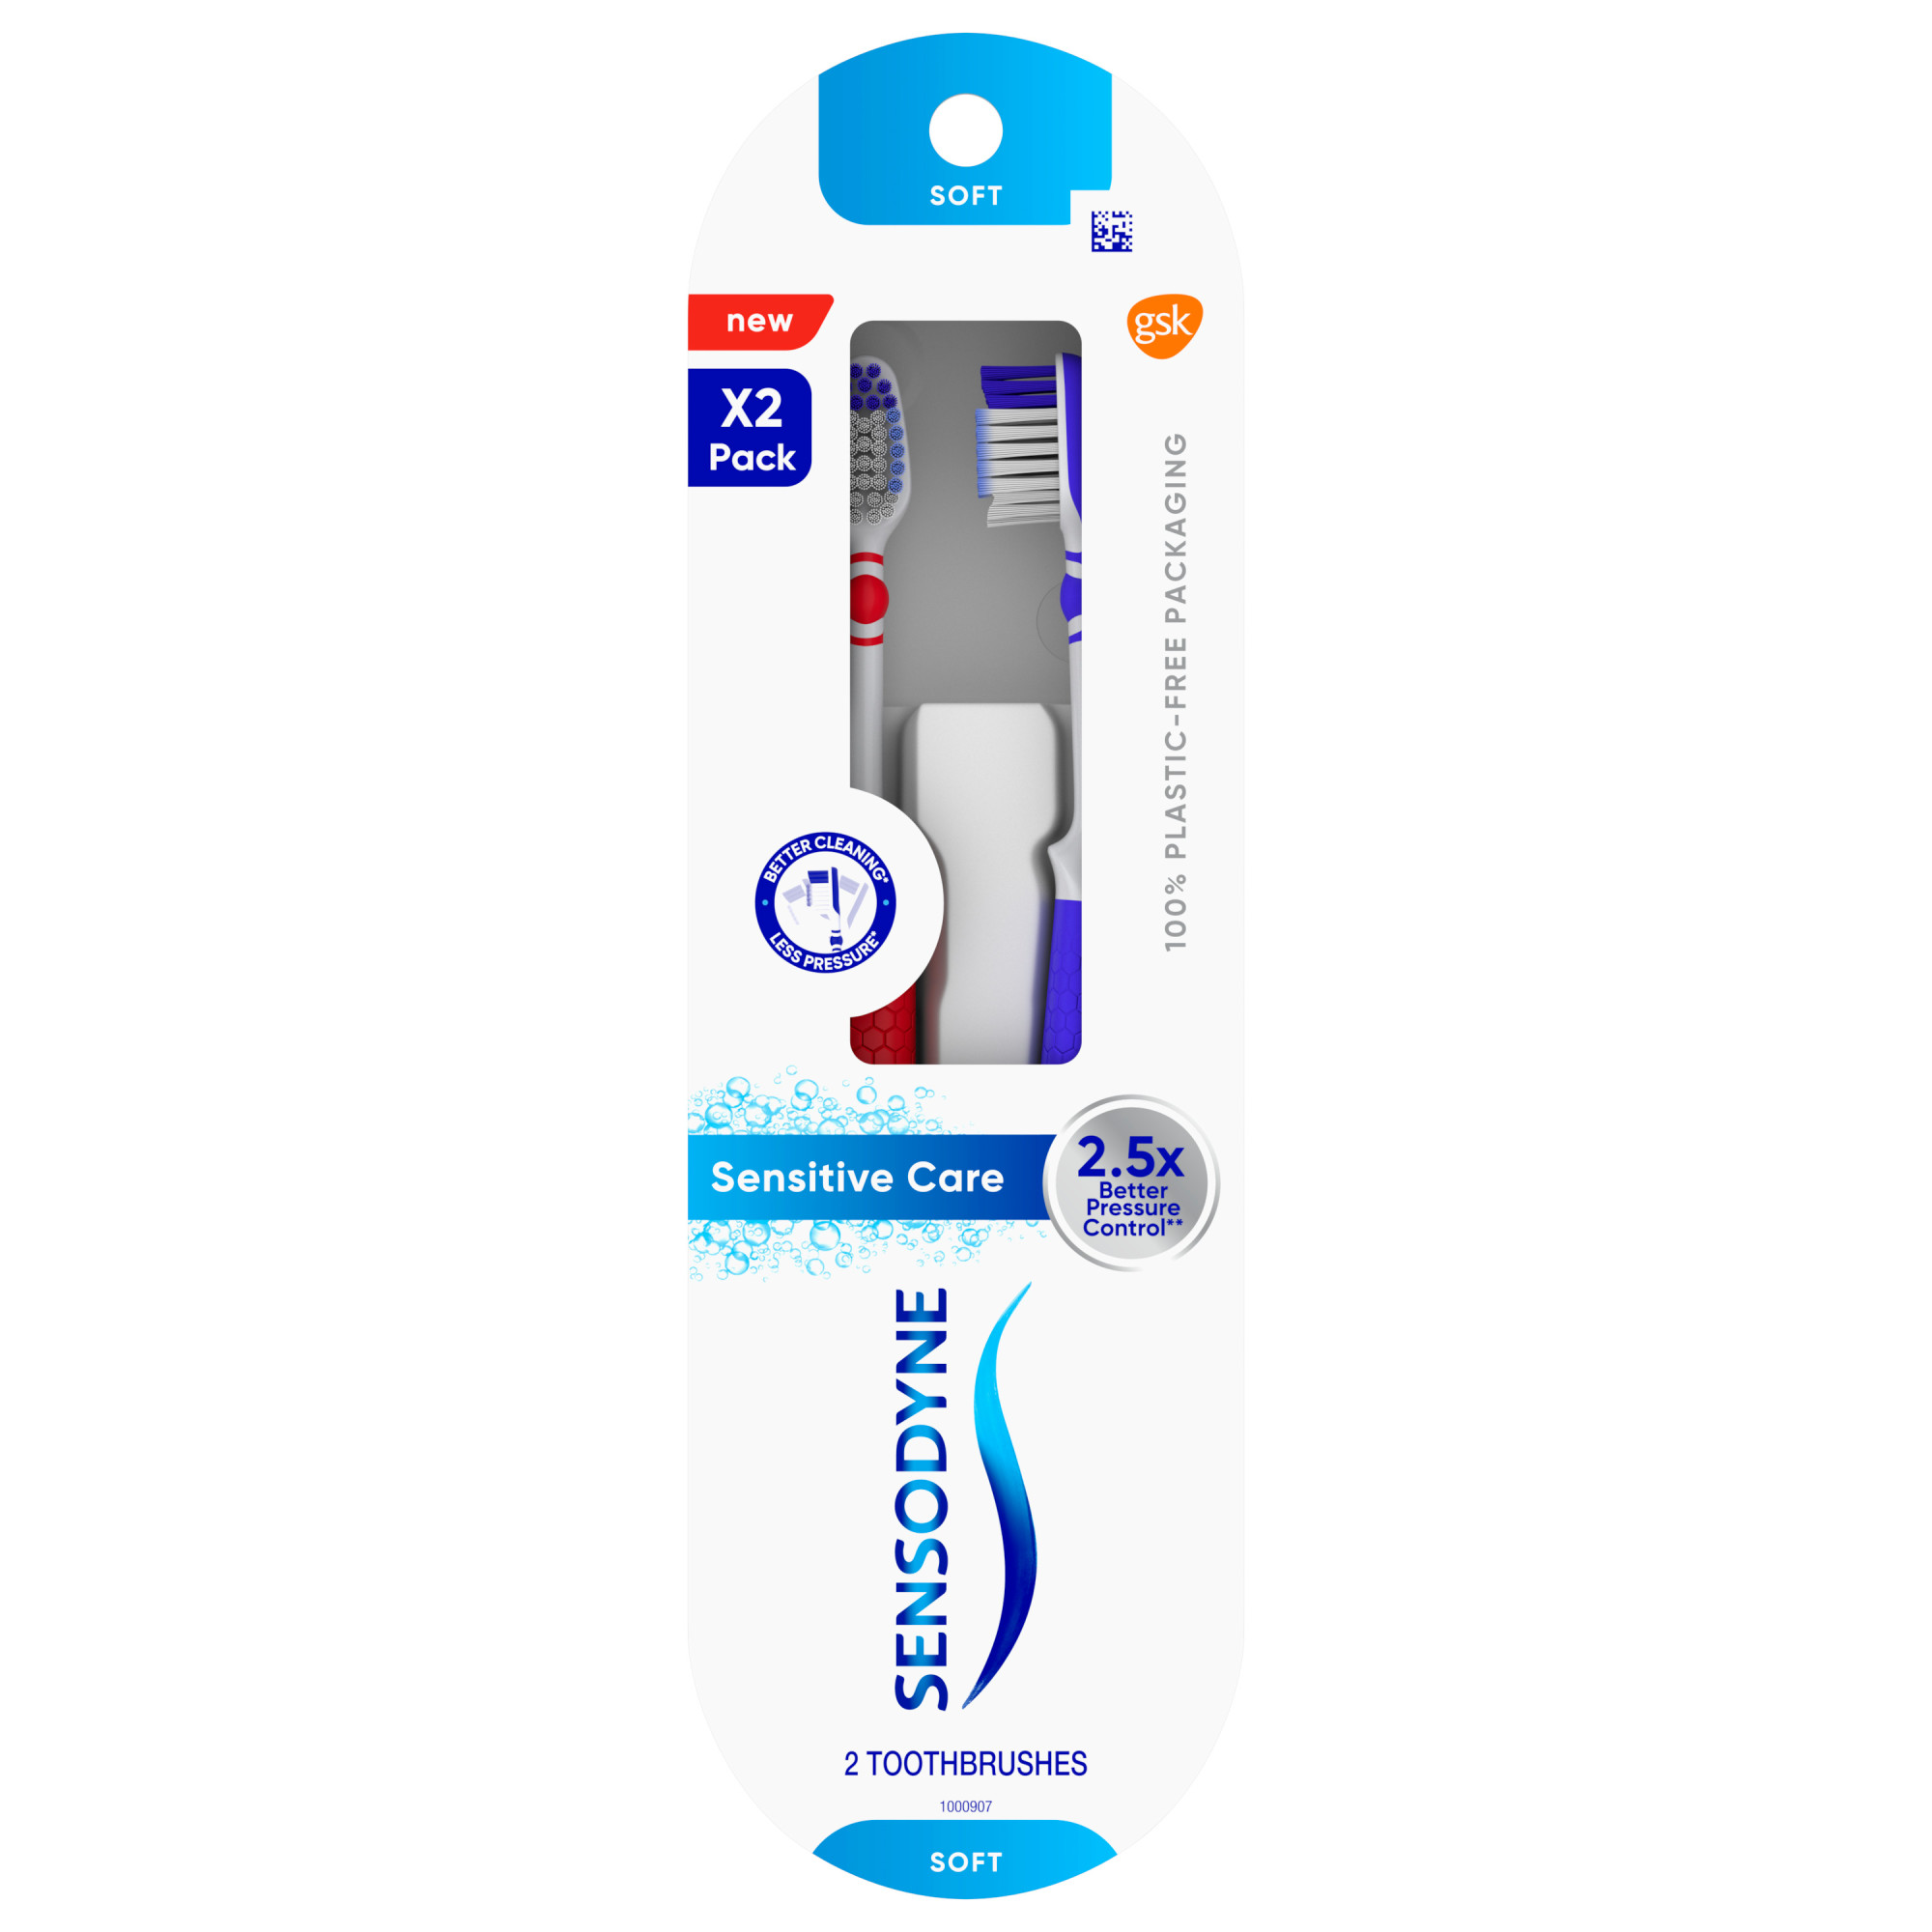 Sensodyne Sensitive Care Toothbrush, Soft, 2 Pack, for Adults - image 1 of 12